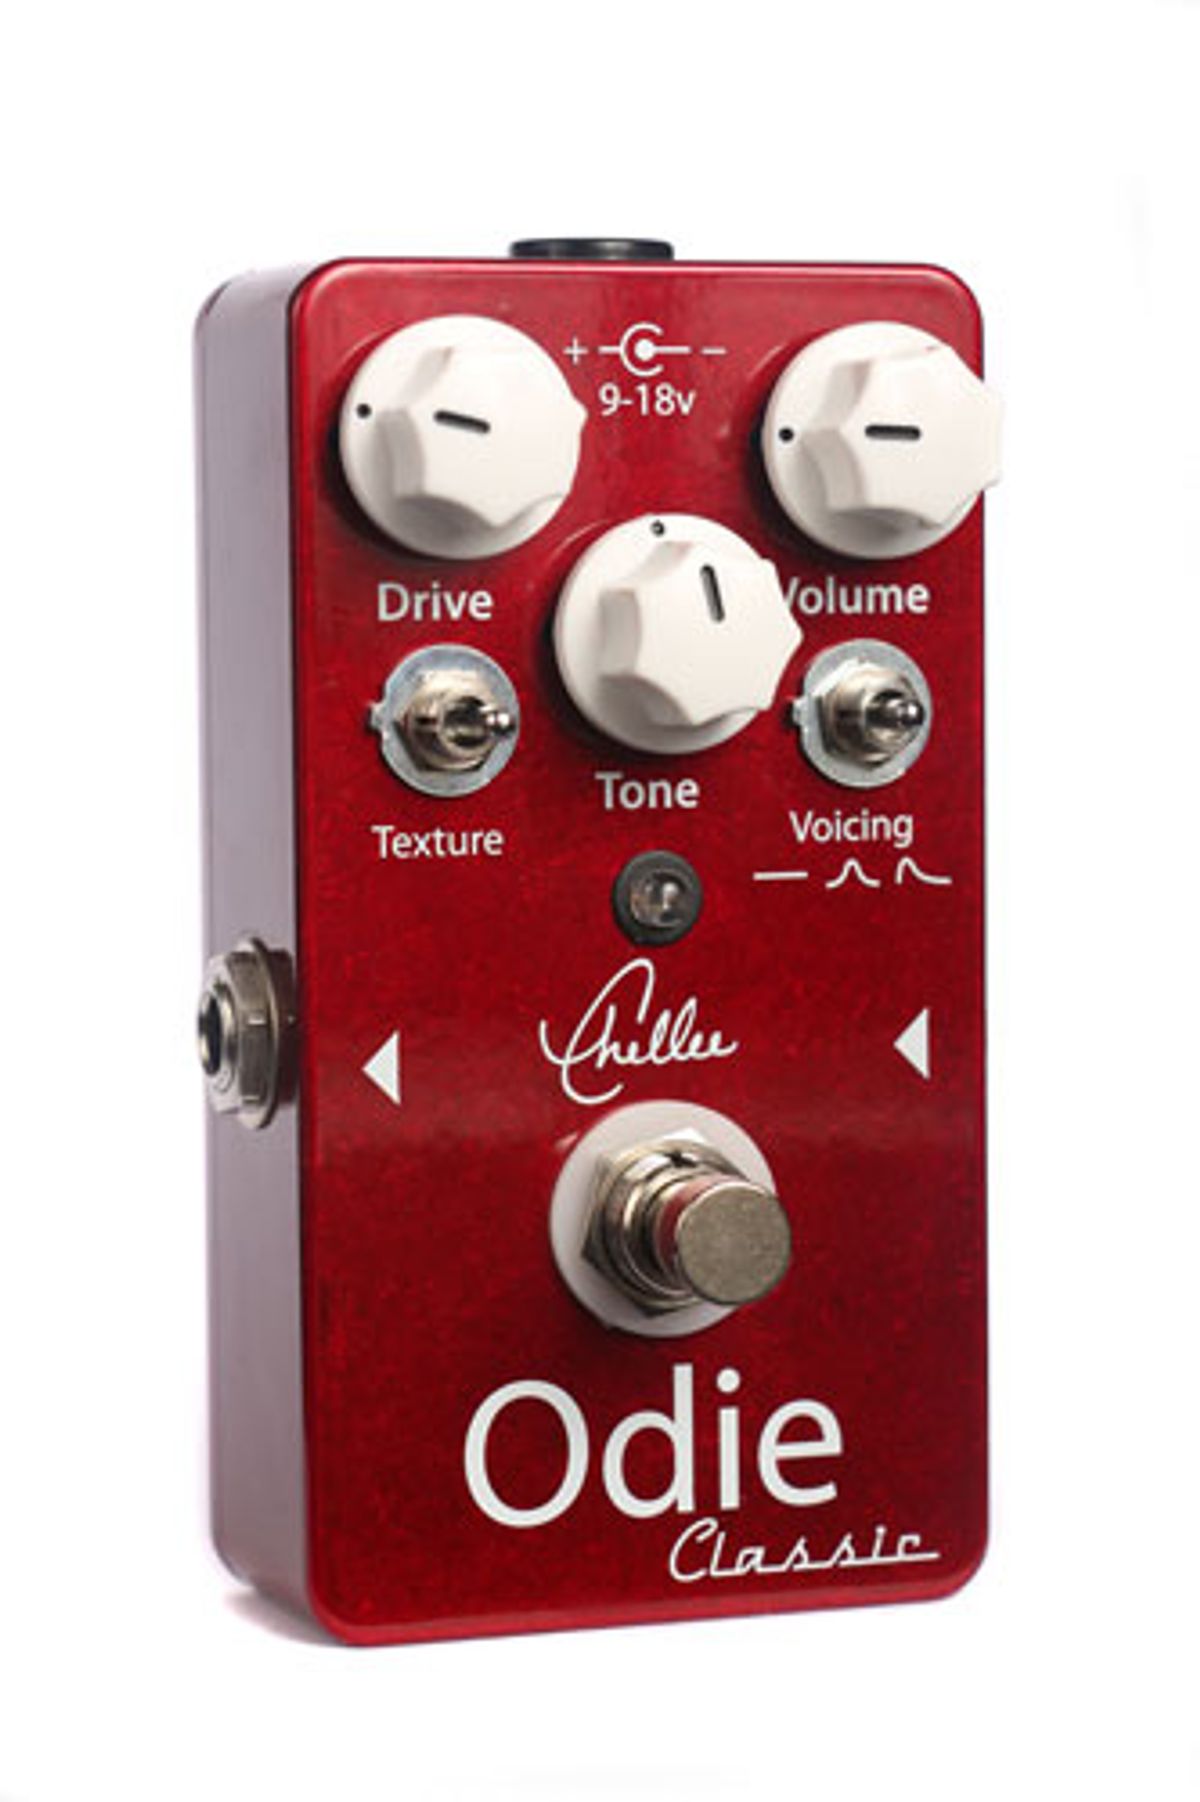 Chellee Guitars Unveils the Odie Classic Overdrive